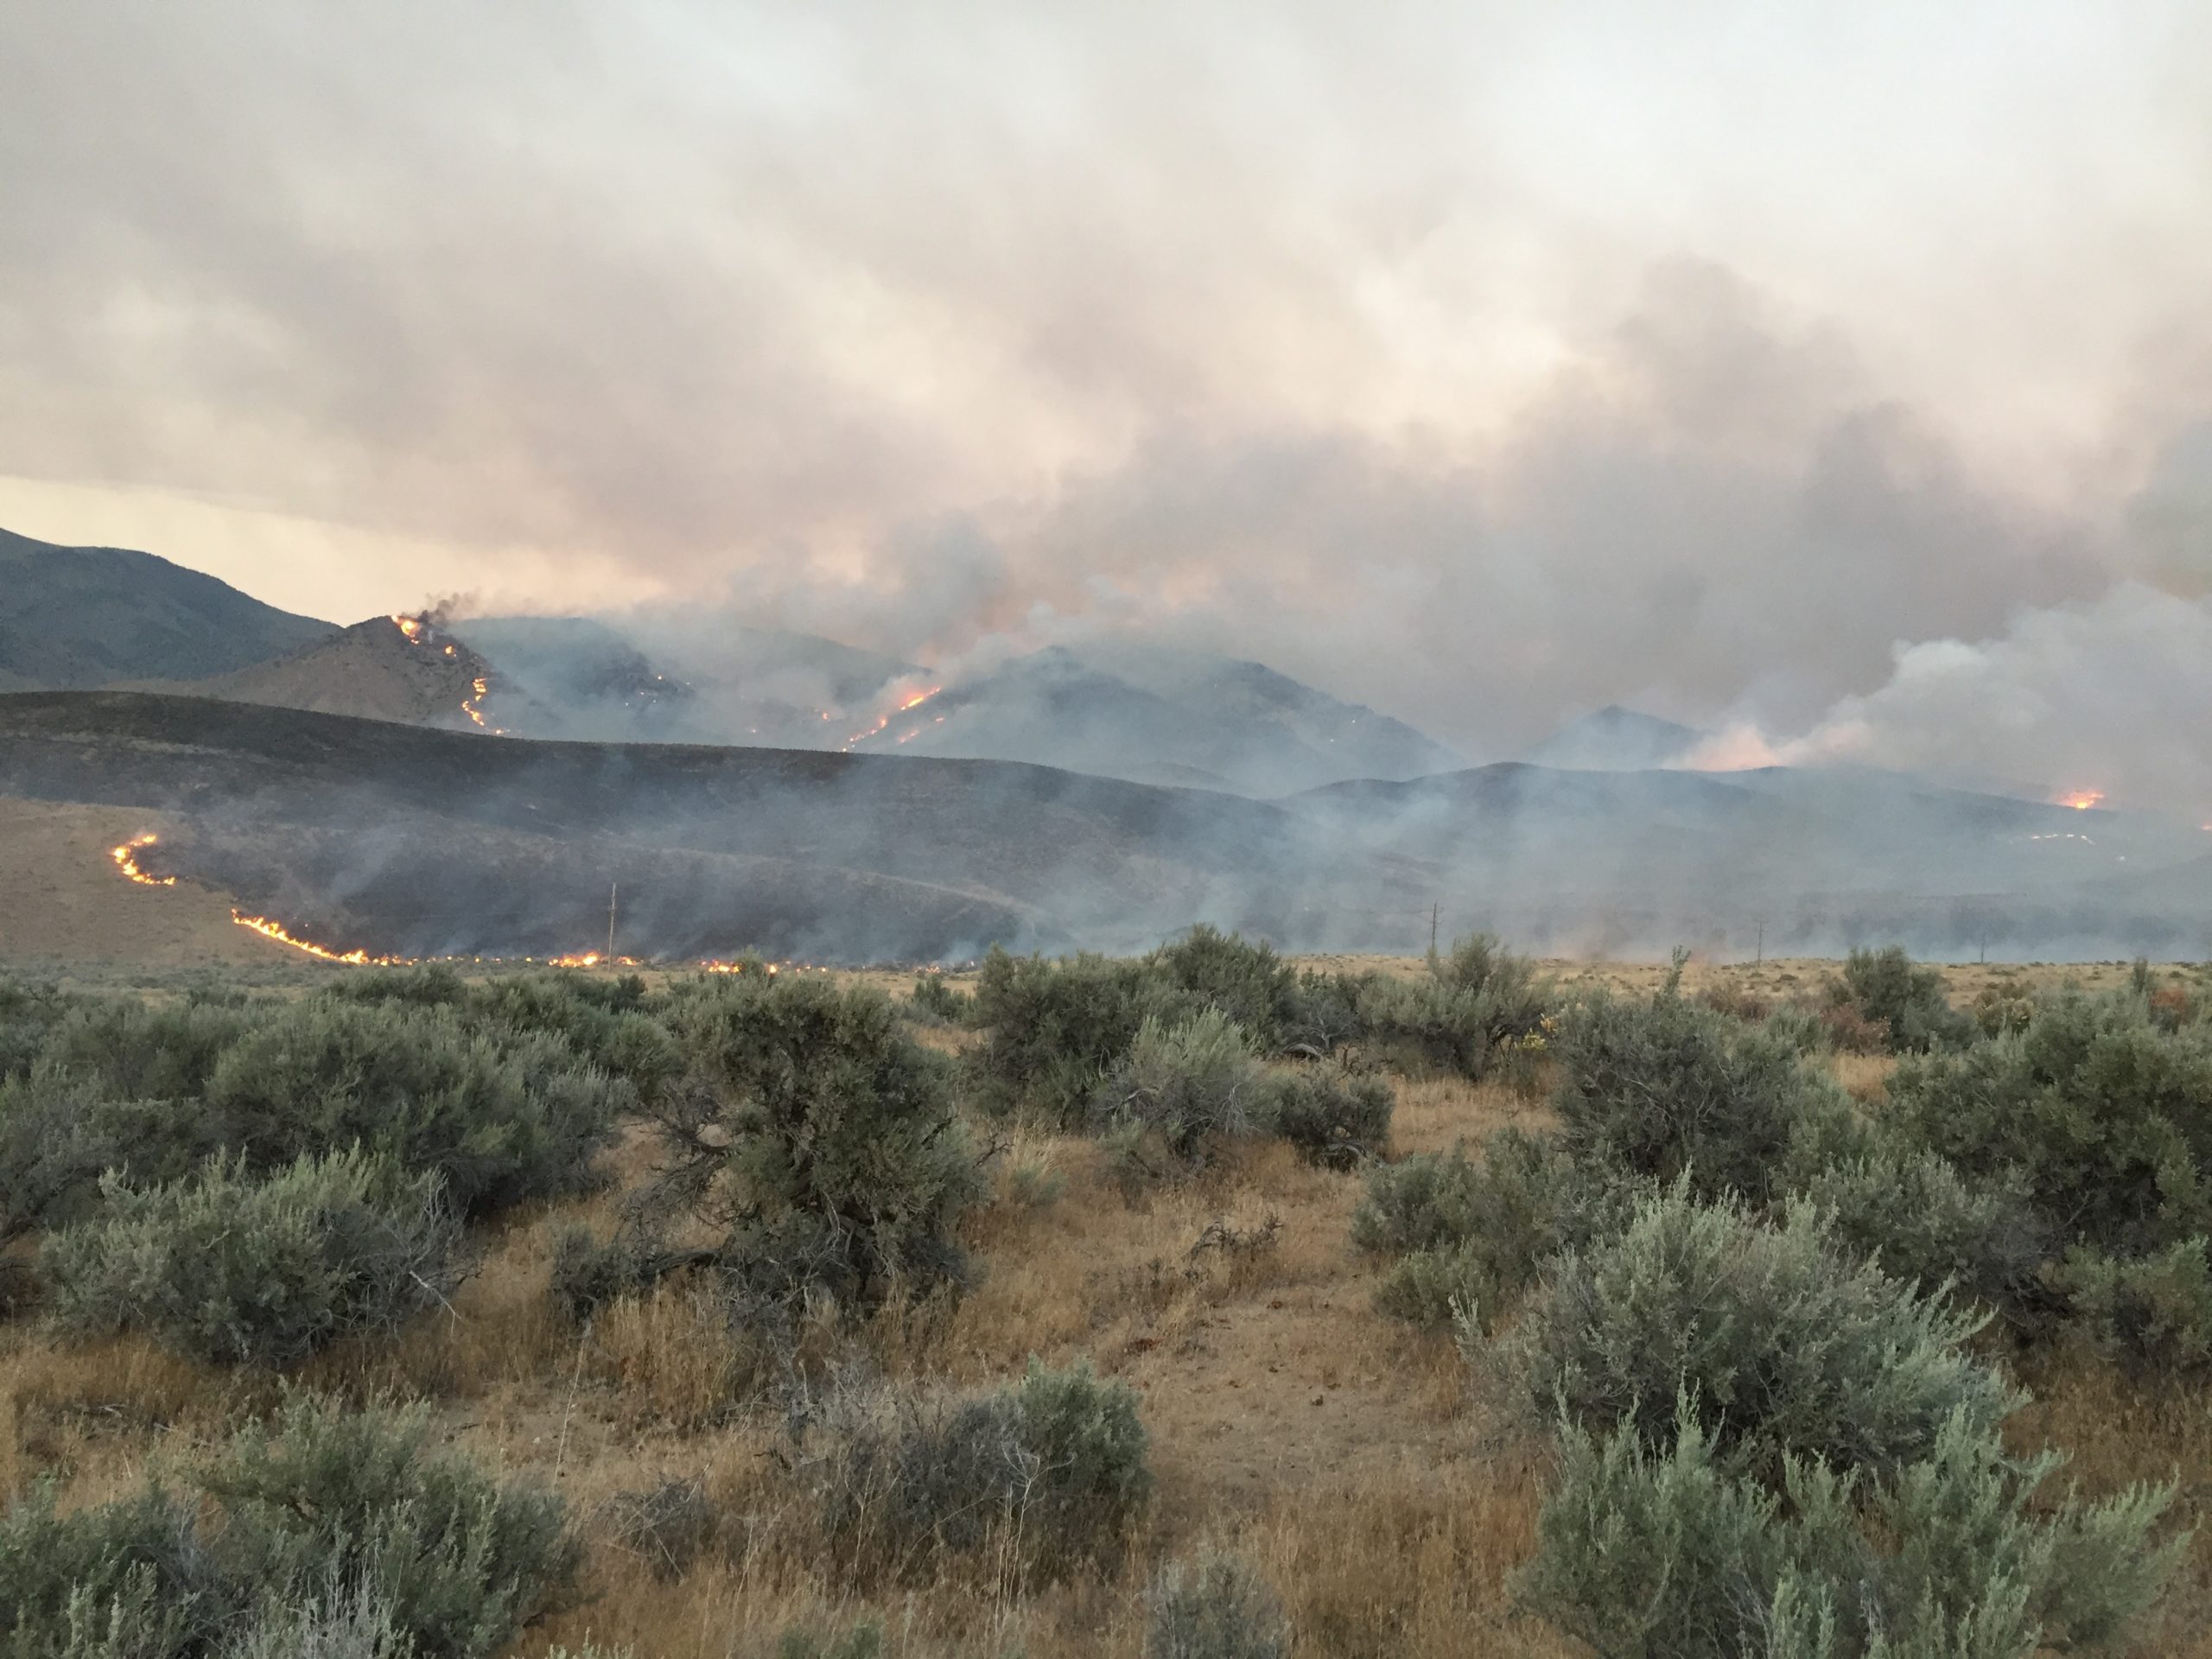 Photo of a landscape with sagebrush and grass in the foreground and in the background, the hills are on fire